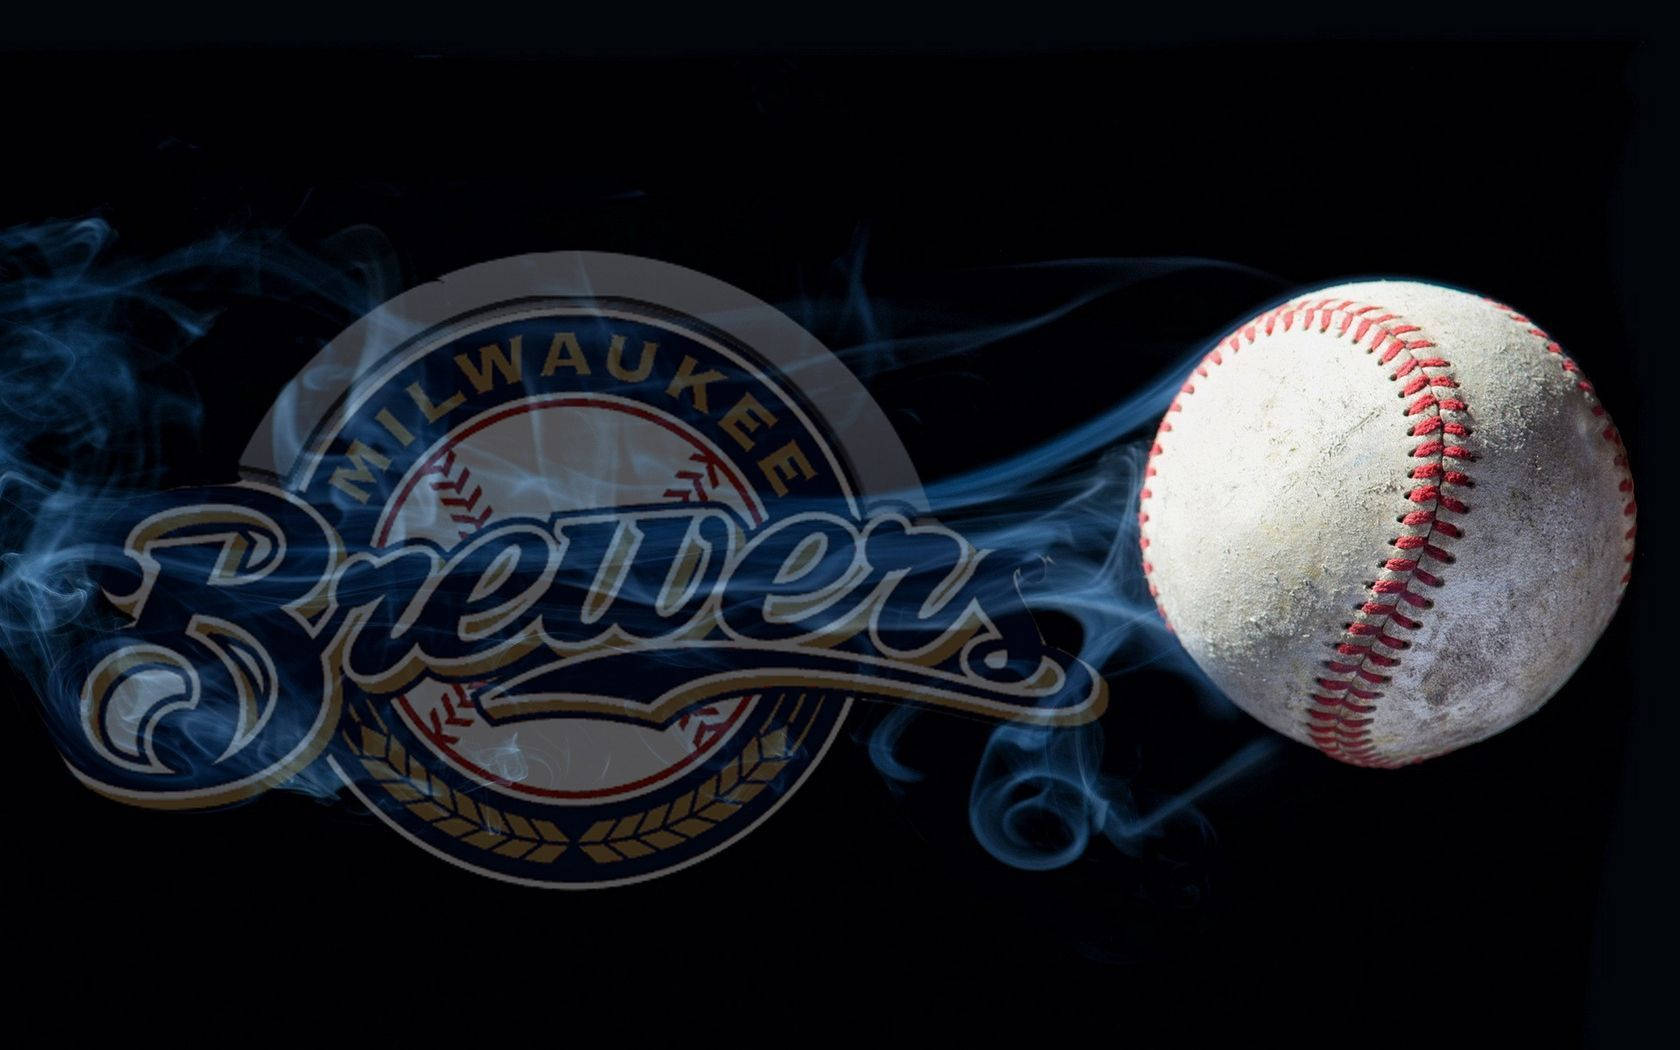 Join the Brew Crew With Milwaukee Brewers Desktop Wallpapers